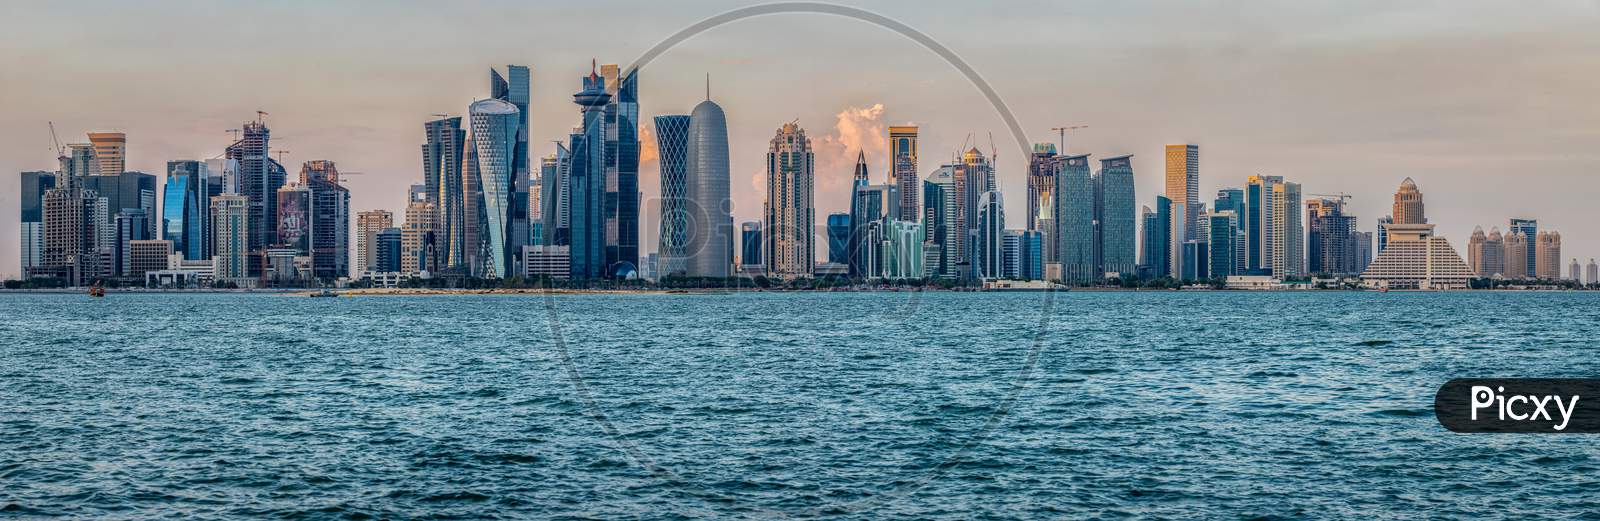 Doha skyline in Cor niche daylight view with clouds in the sky